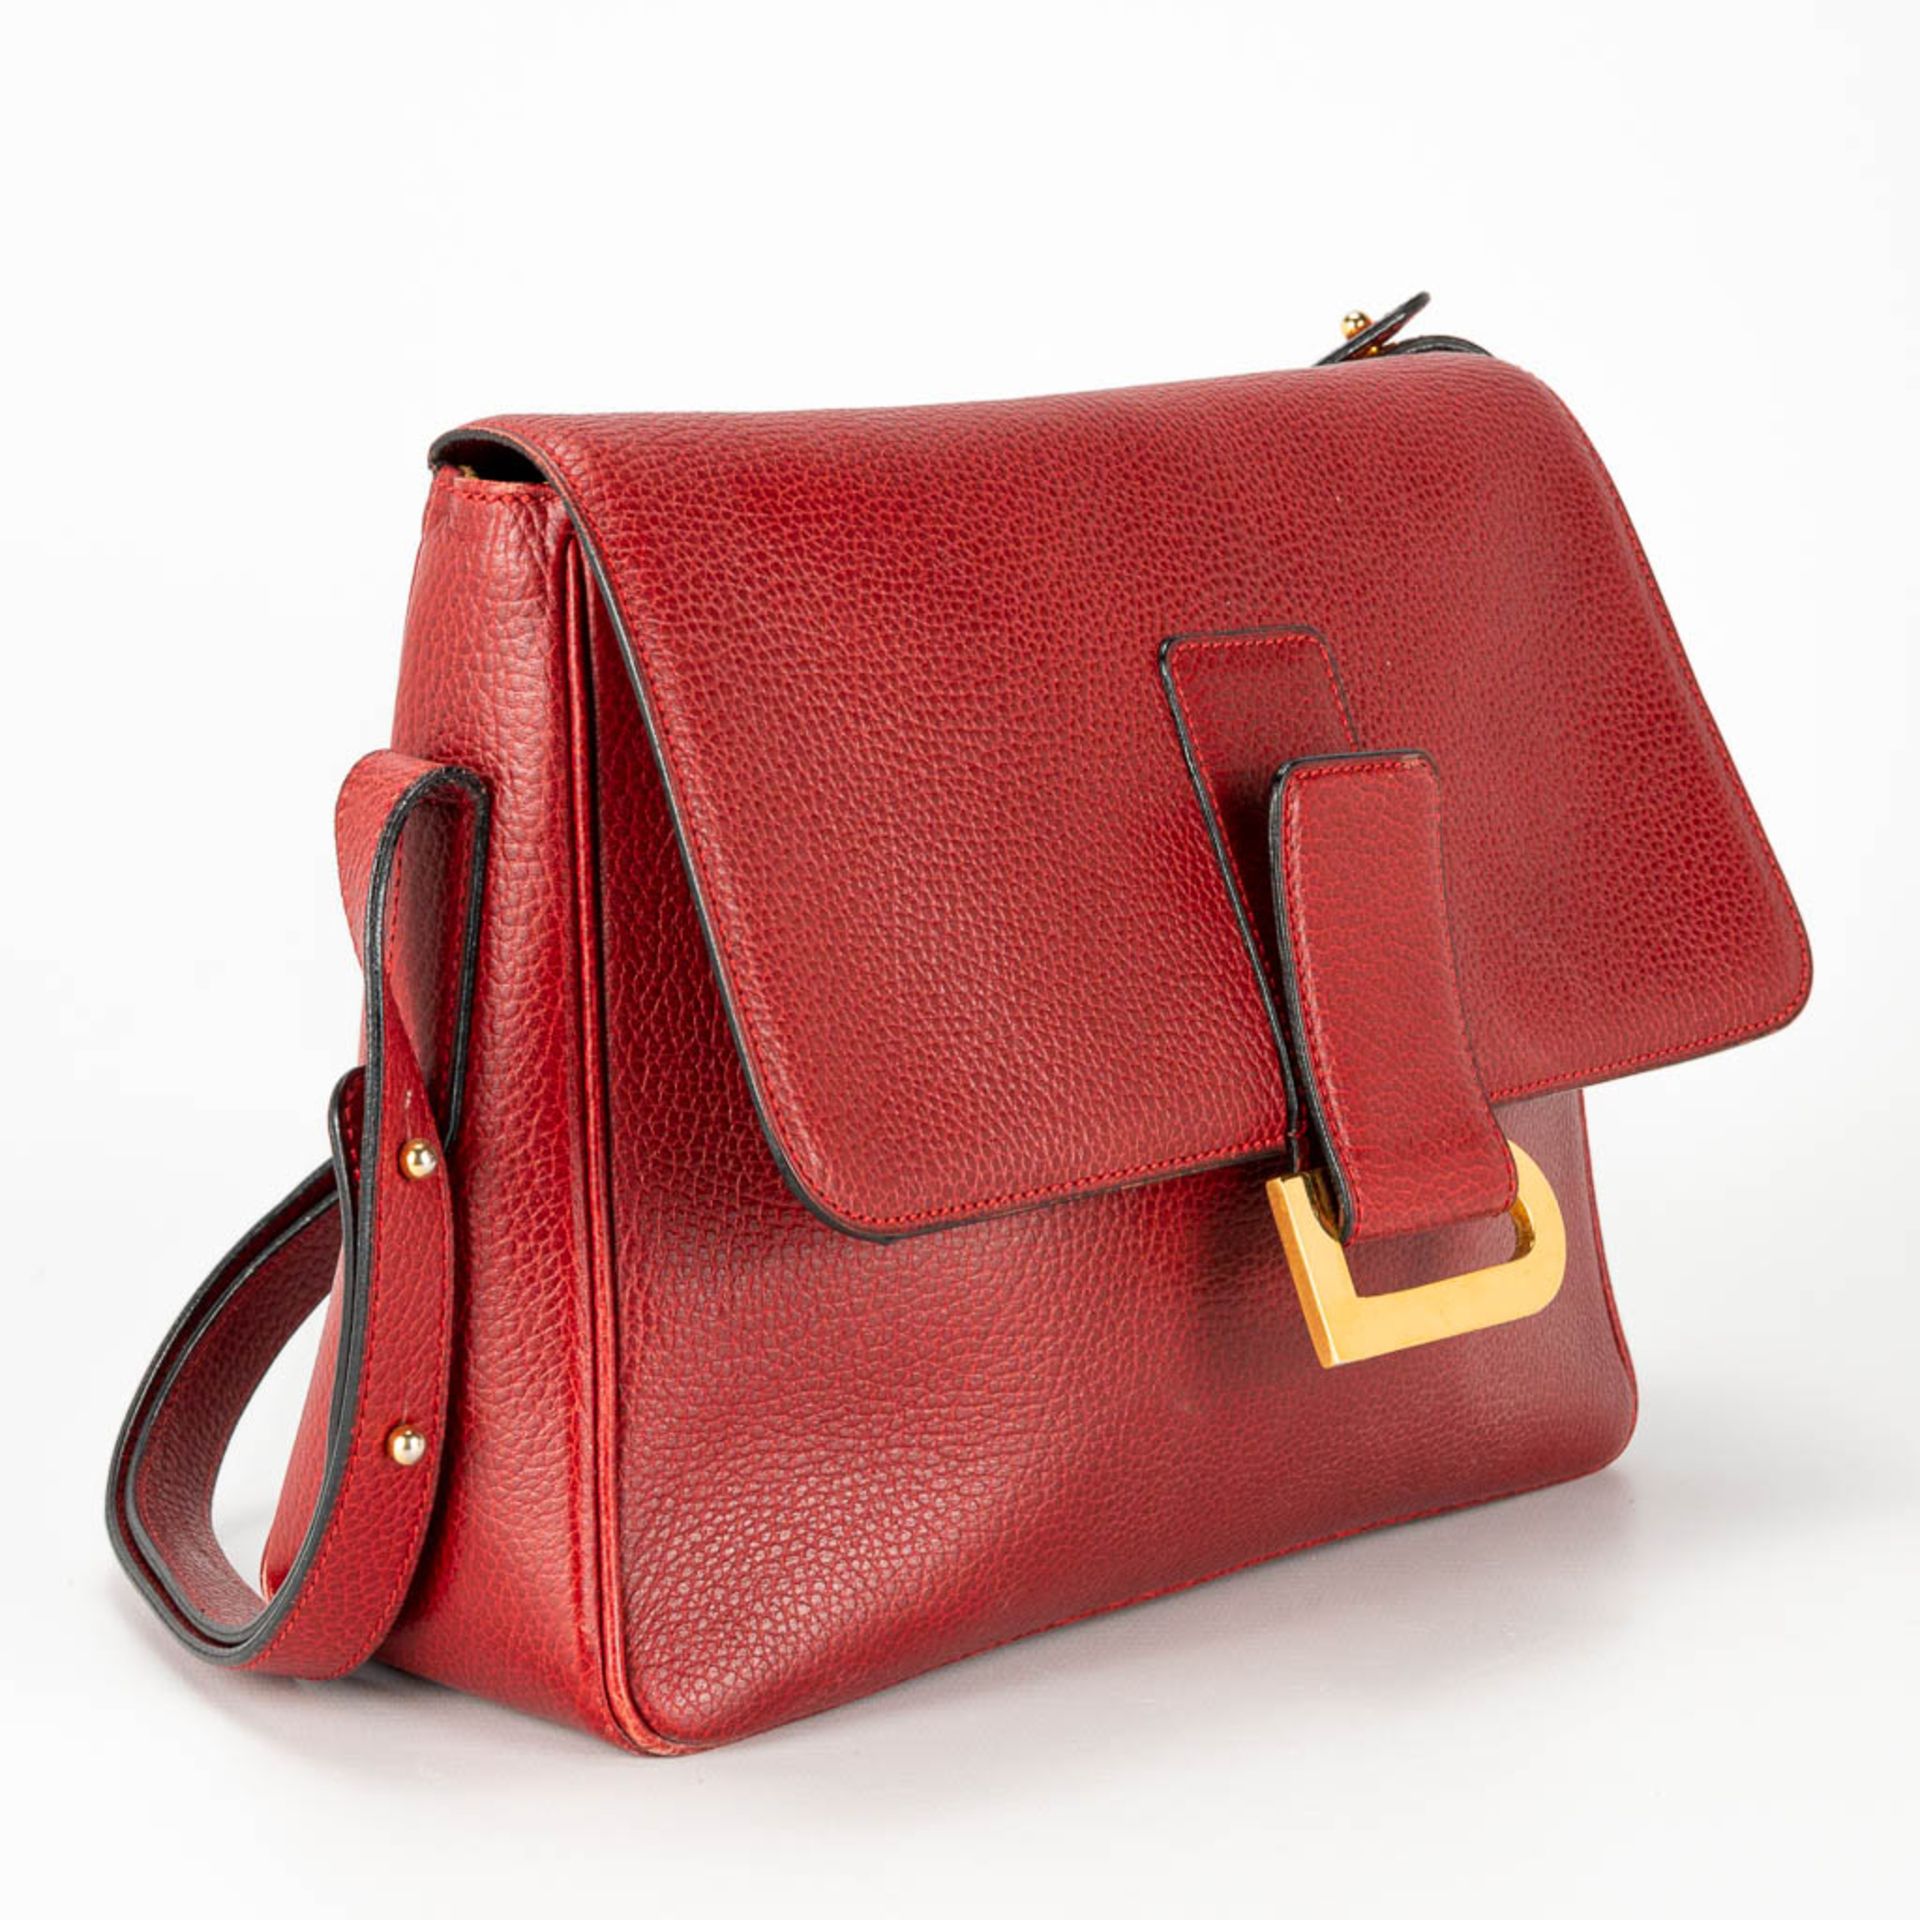 A purse made of red leather and marked Delvaux. - Image 7 of 16